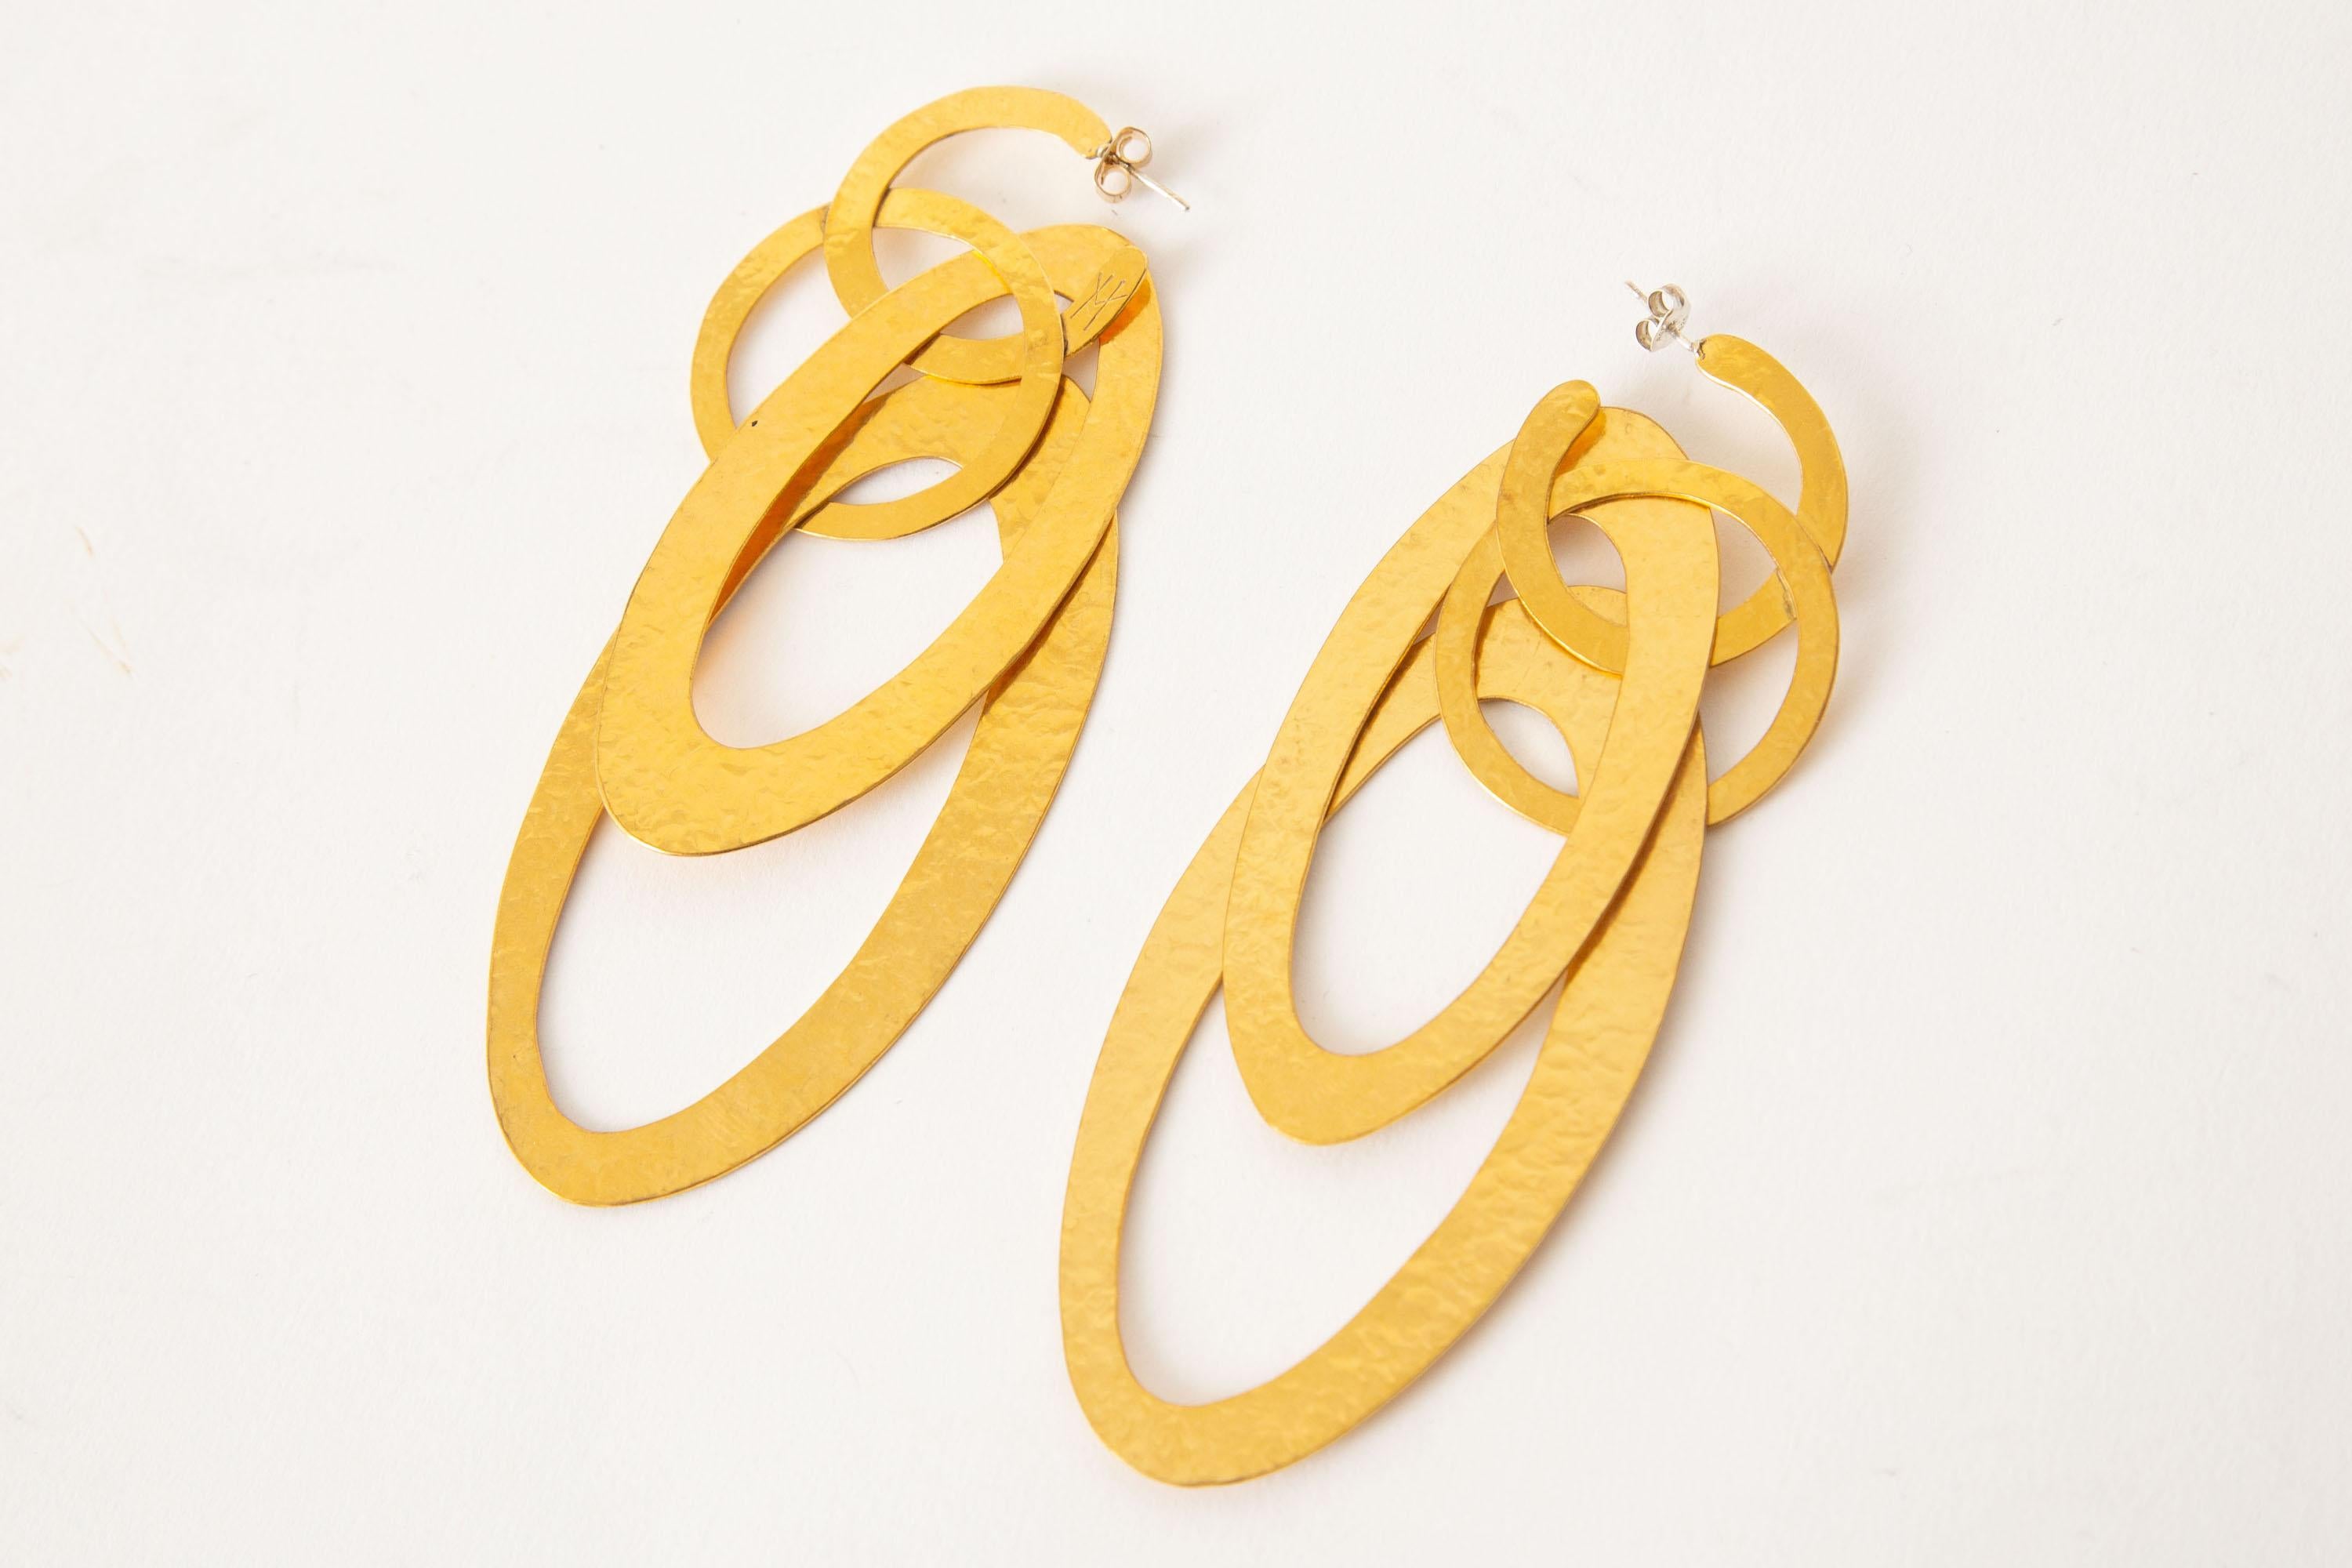 These dramatic french geometric hand wrought gold plated and hand hammered pierced earrings are by Herve Van der Straeten. They are long dangle earrings with angled circles; geometric with a twist of ancient civilizations brought to a modern look.